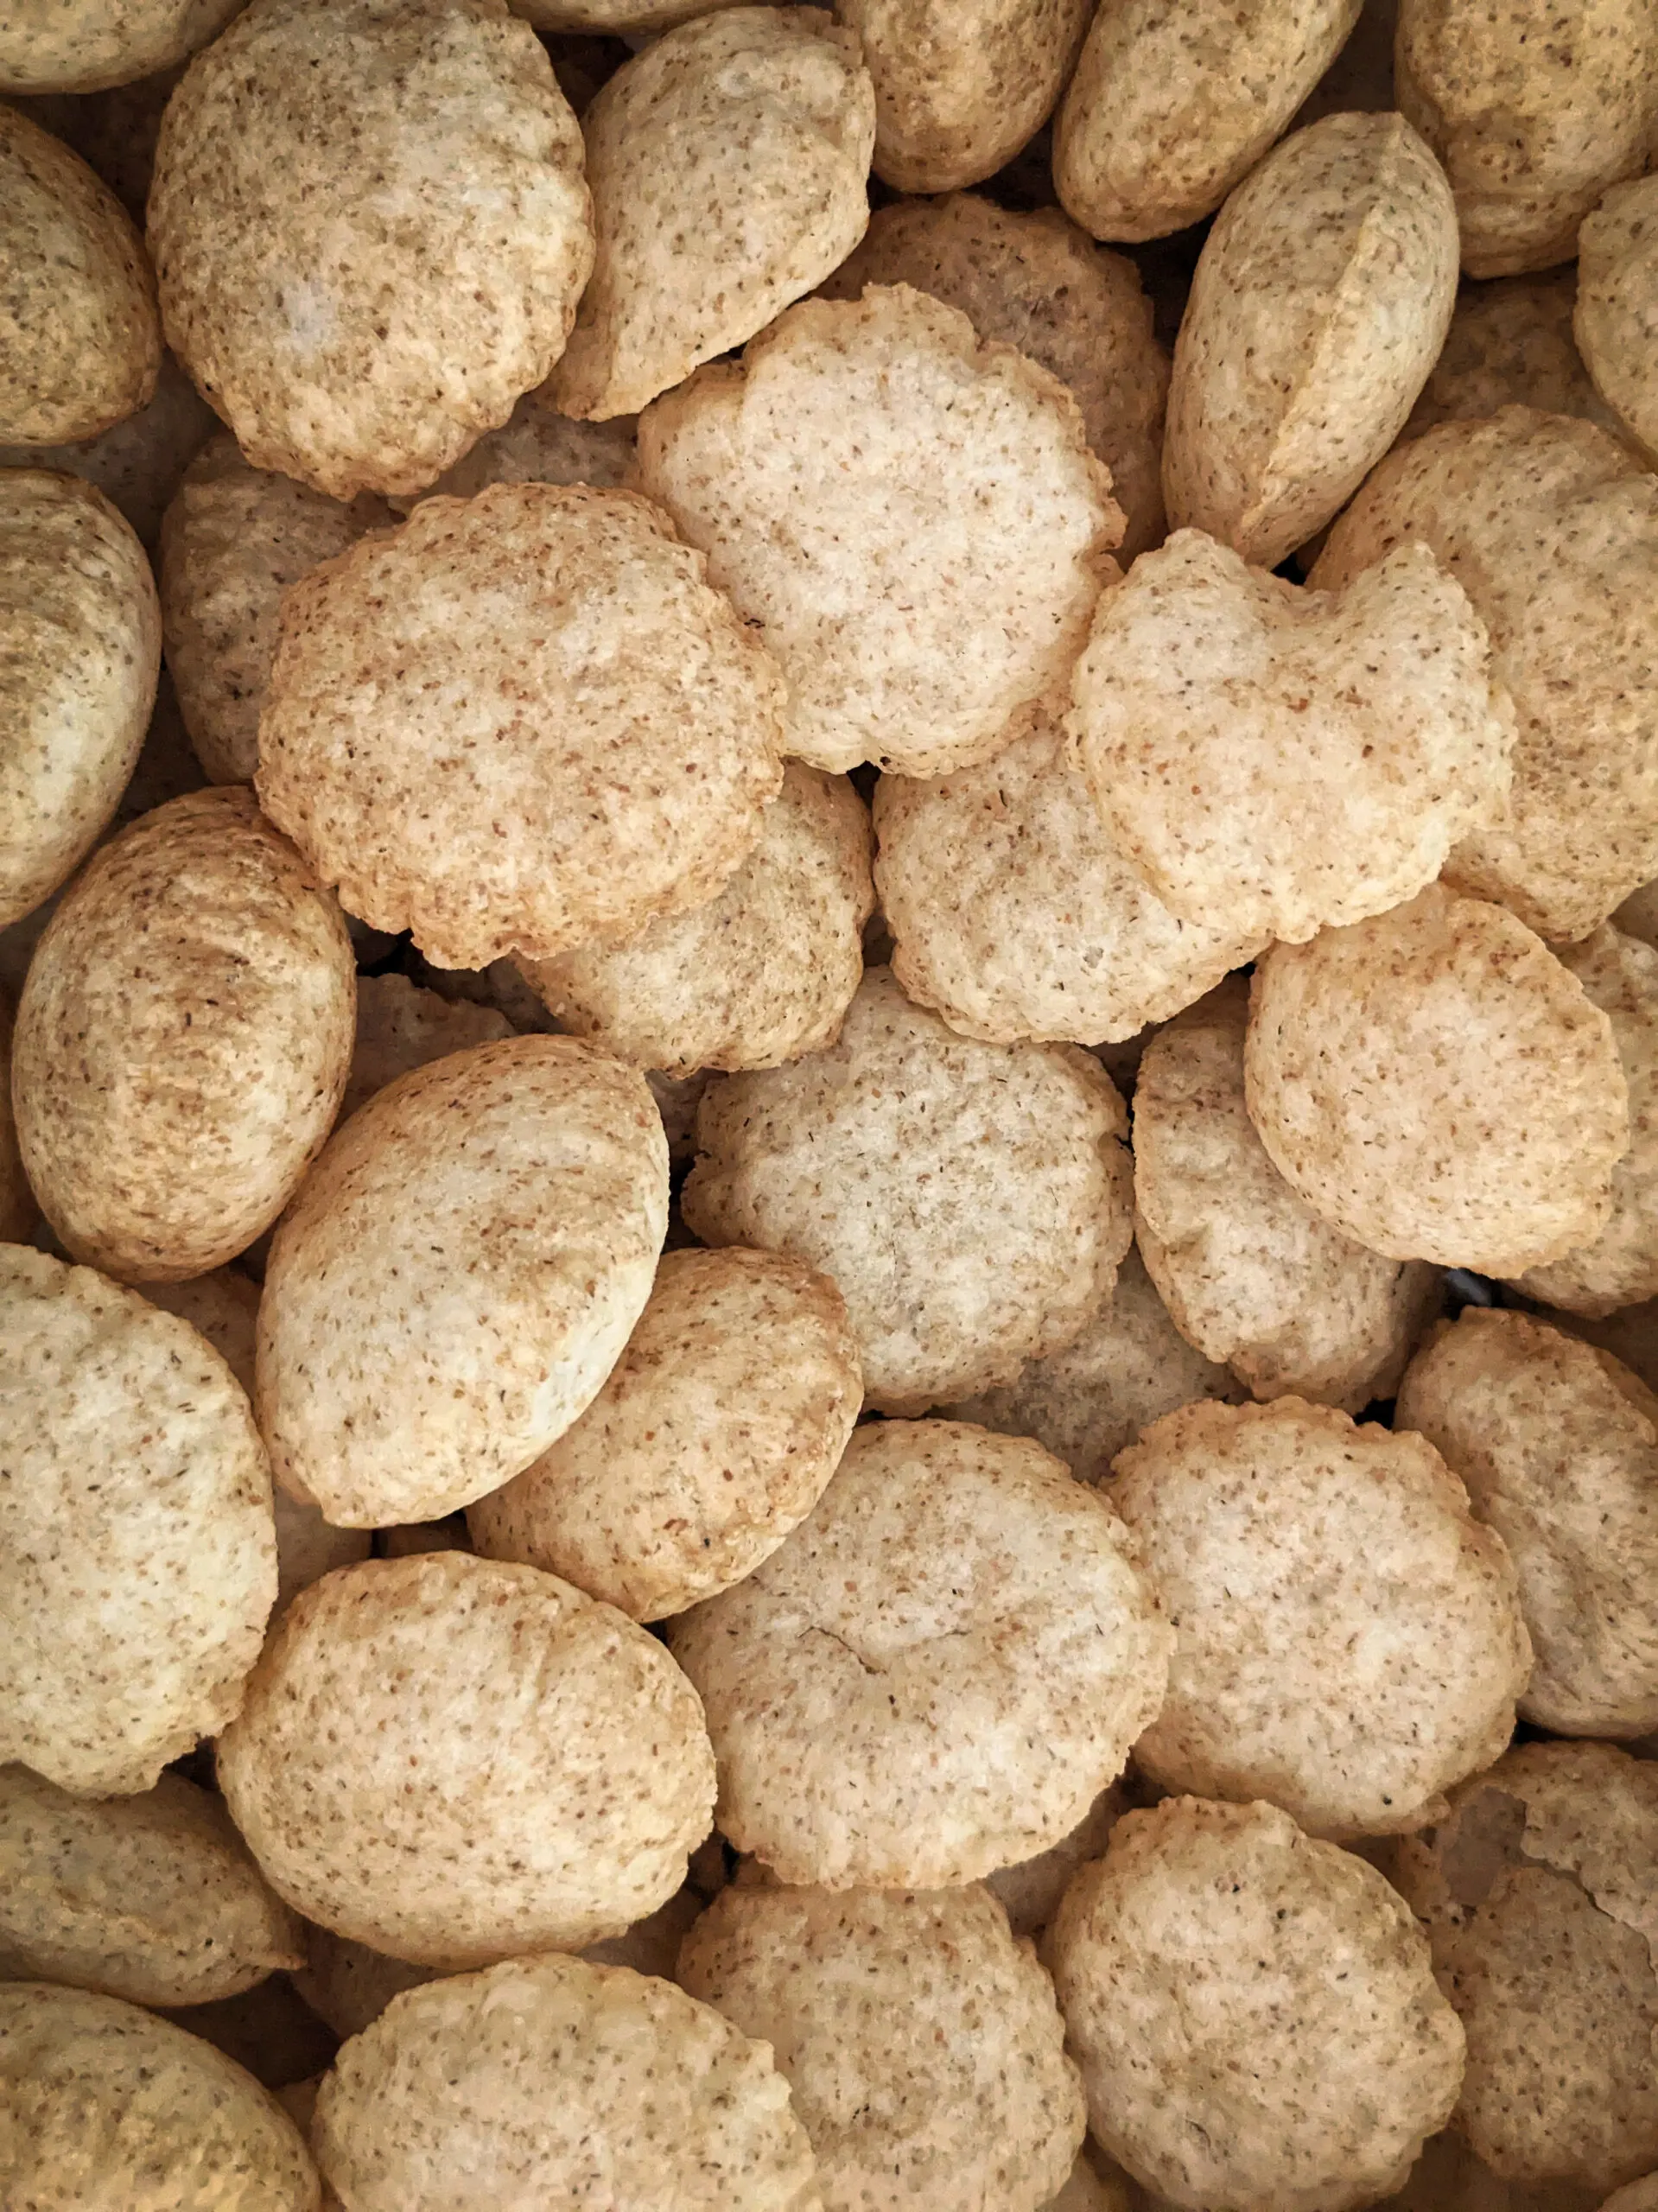 A close up of a bunch of puris.